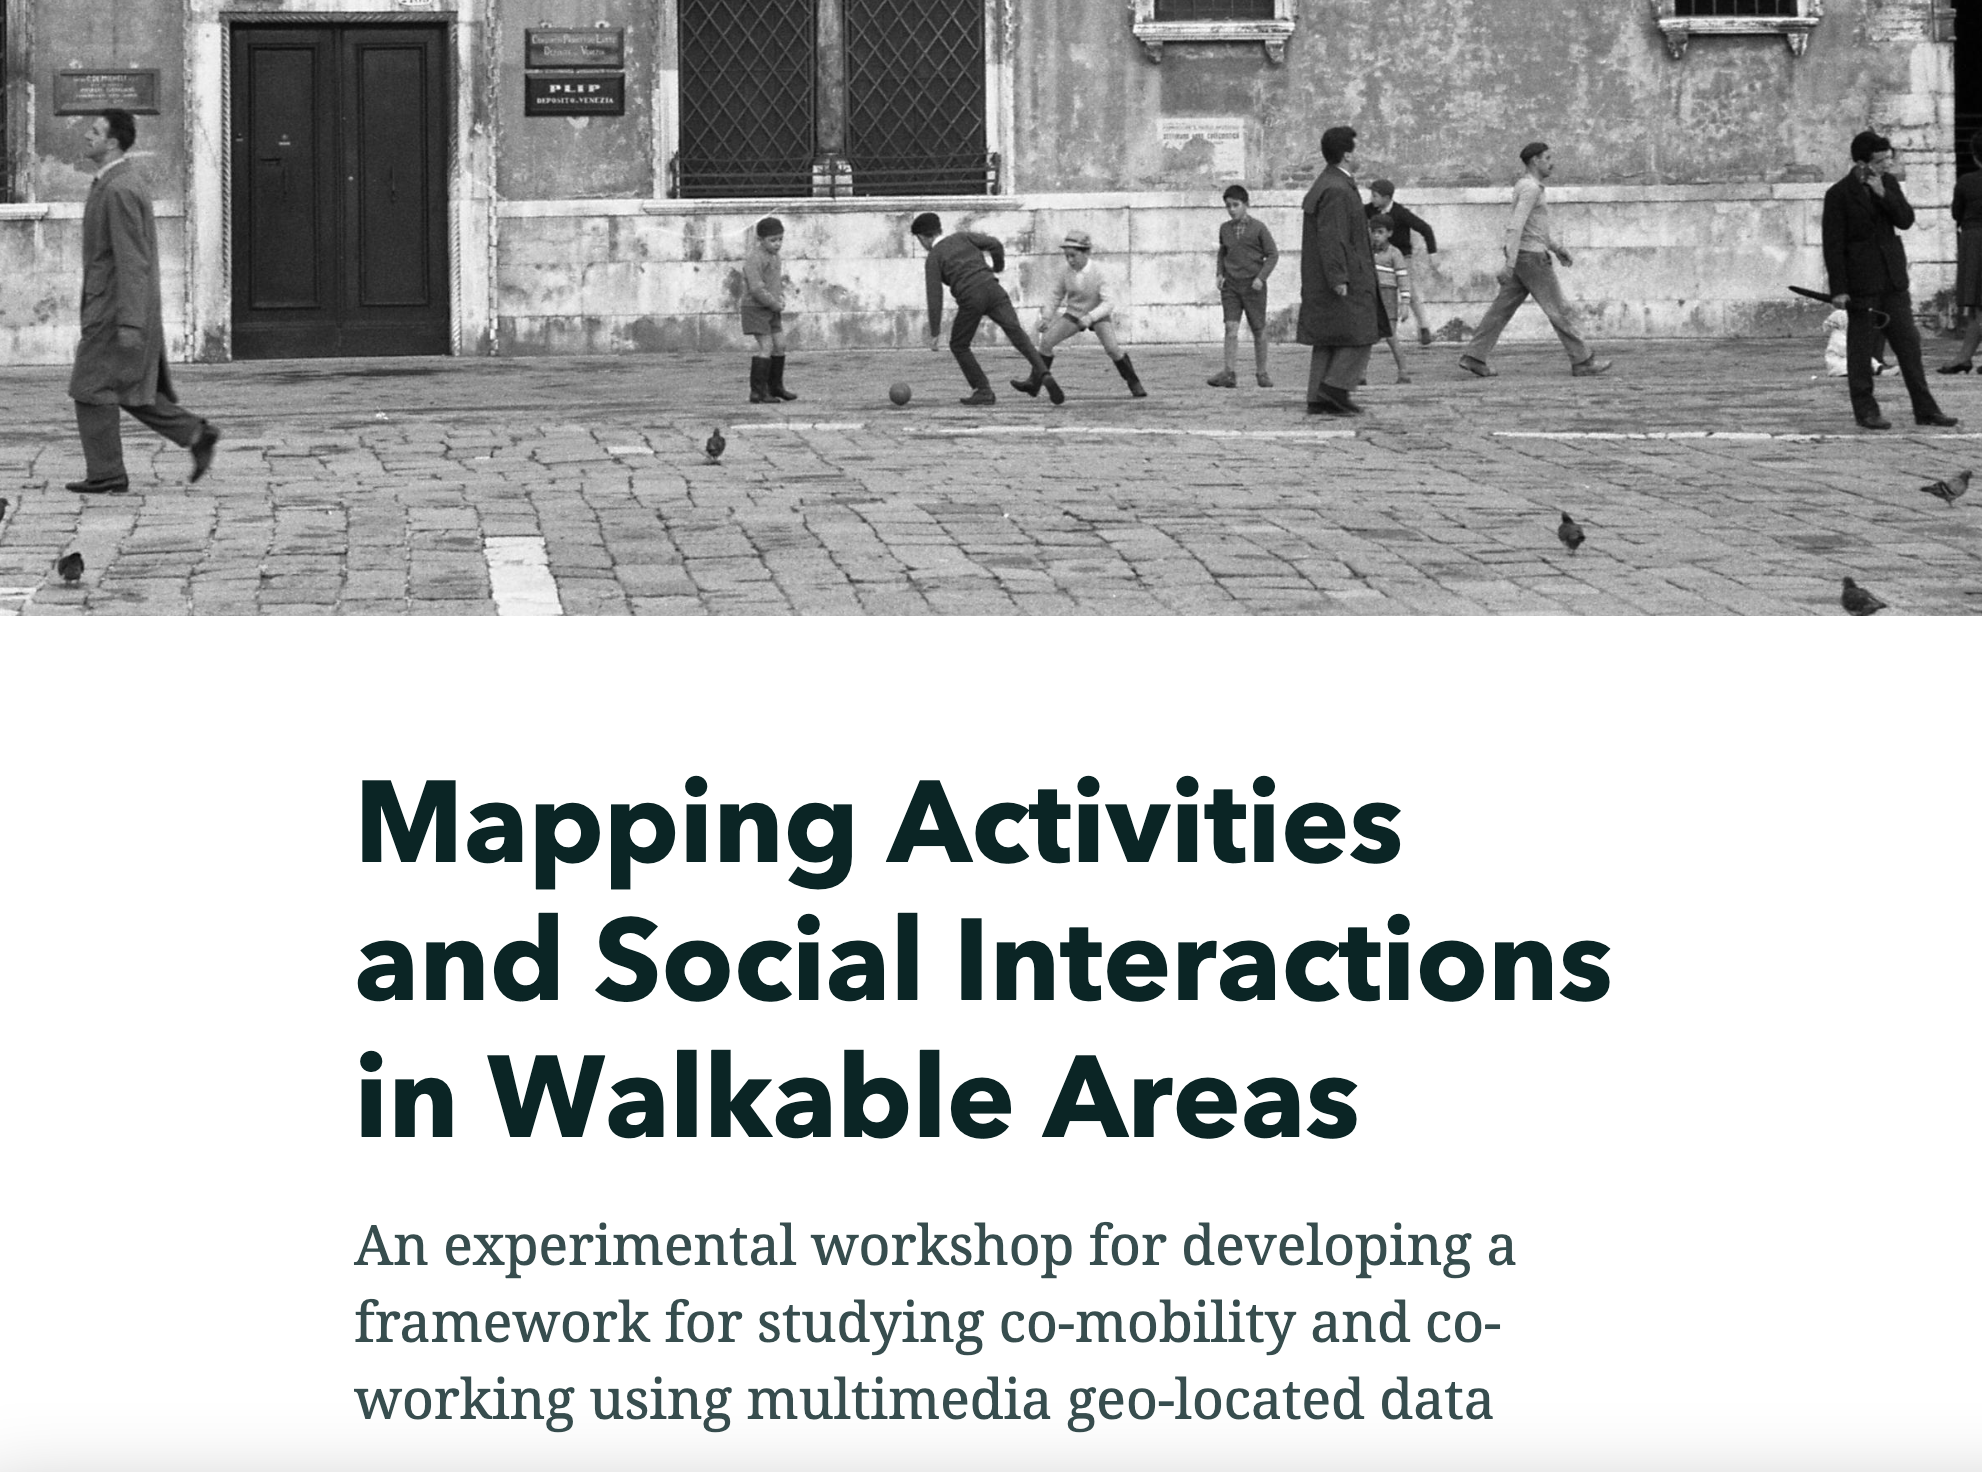 Workshop | Mapping Activities and Social Interactions in Walkable Areas